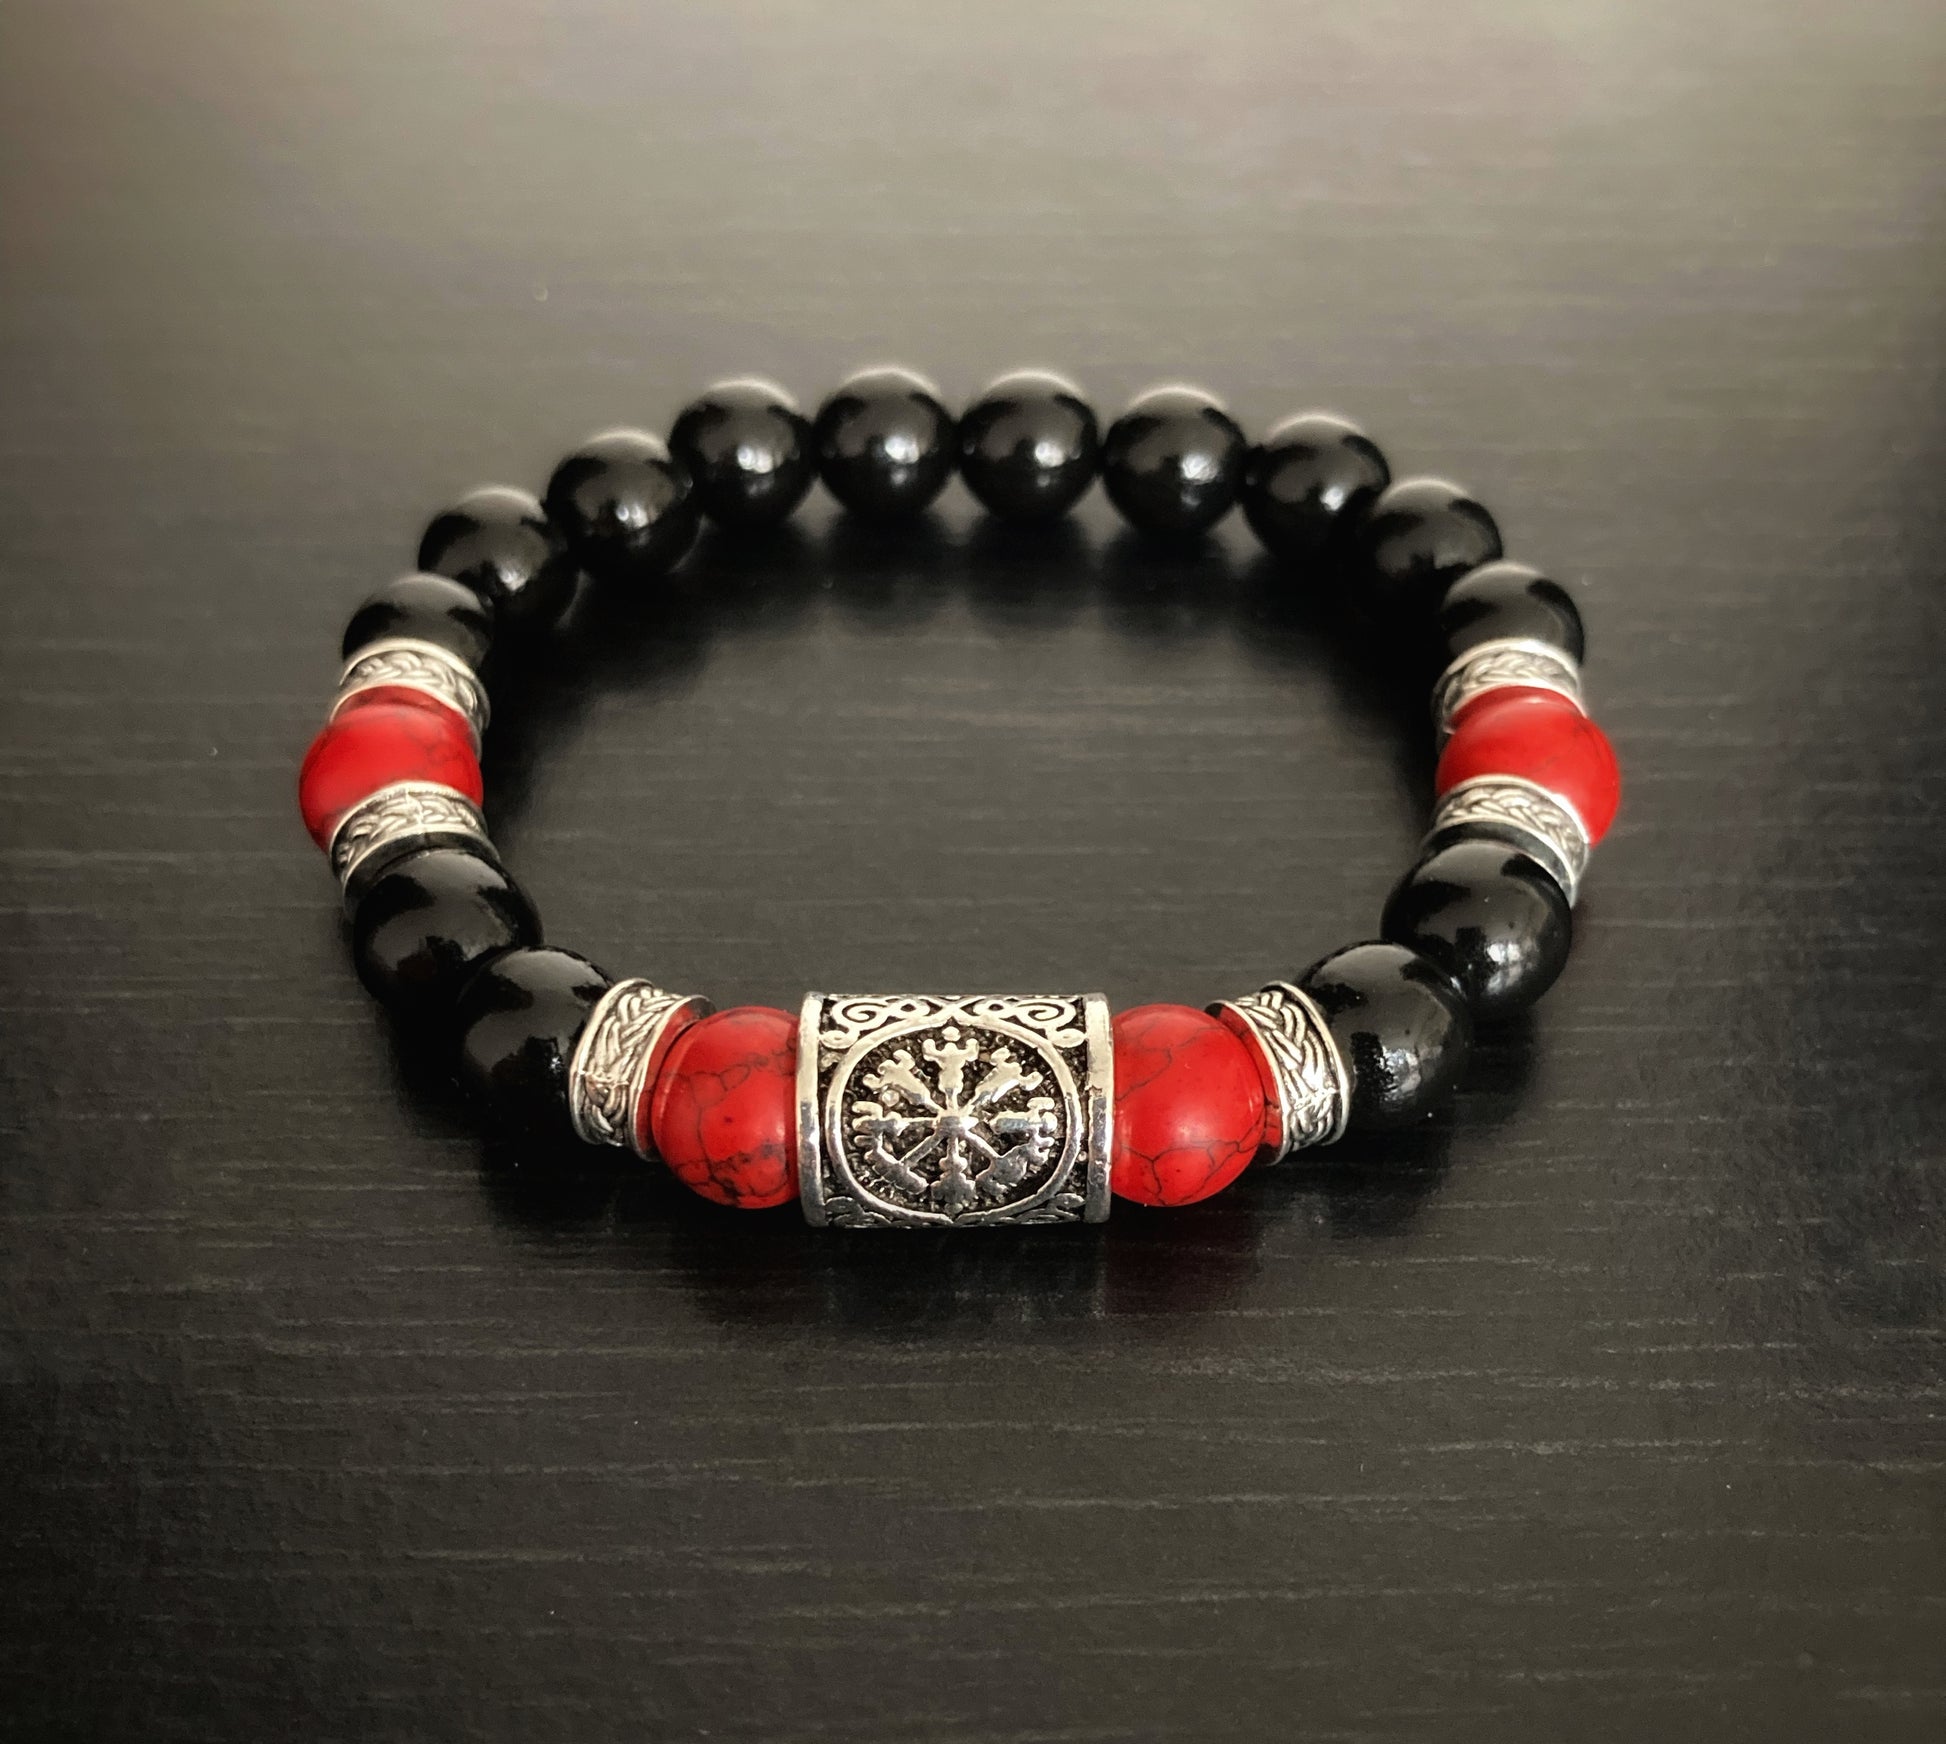 A stunning bracelet sits on a black background. This item has black wooden beads as well as red turquoise ones and between them are round silver metal patterned pieces. The main feature of it is a rune helm of awe also in silver.